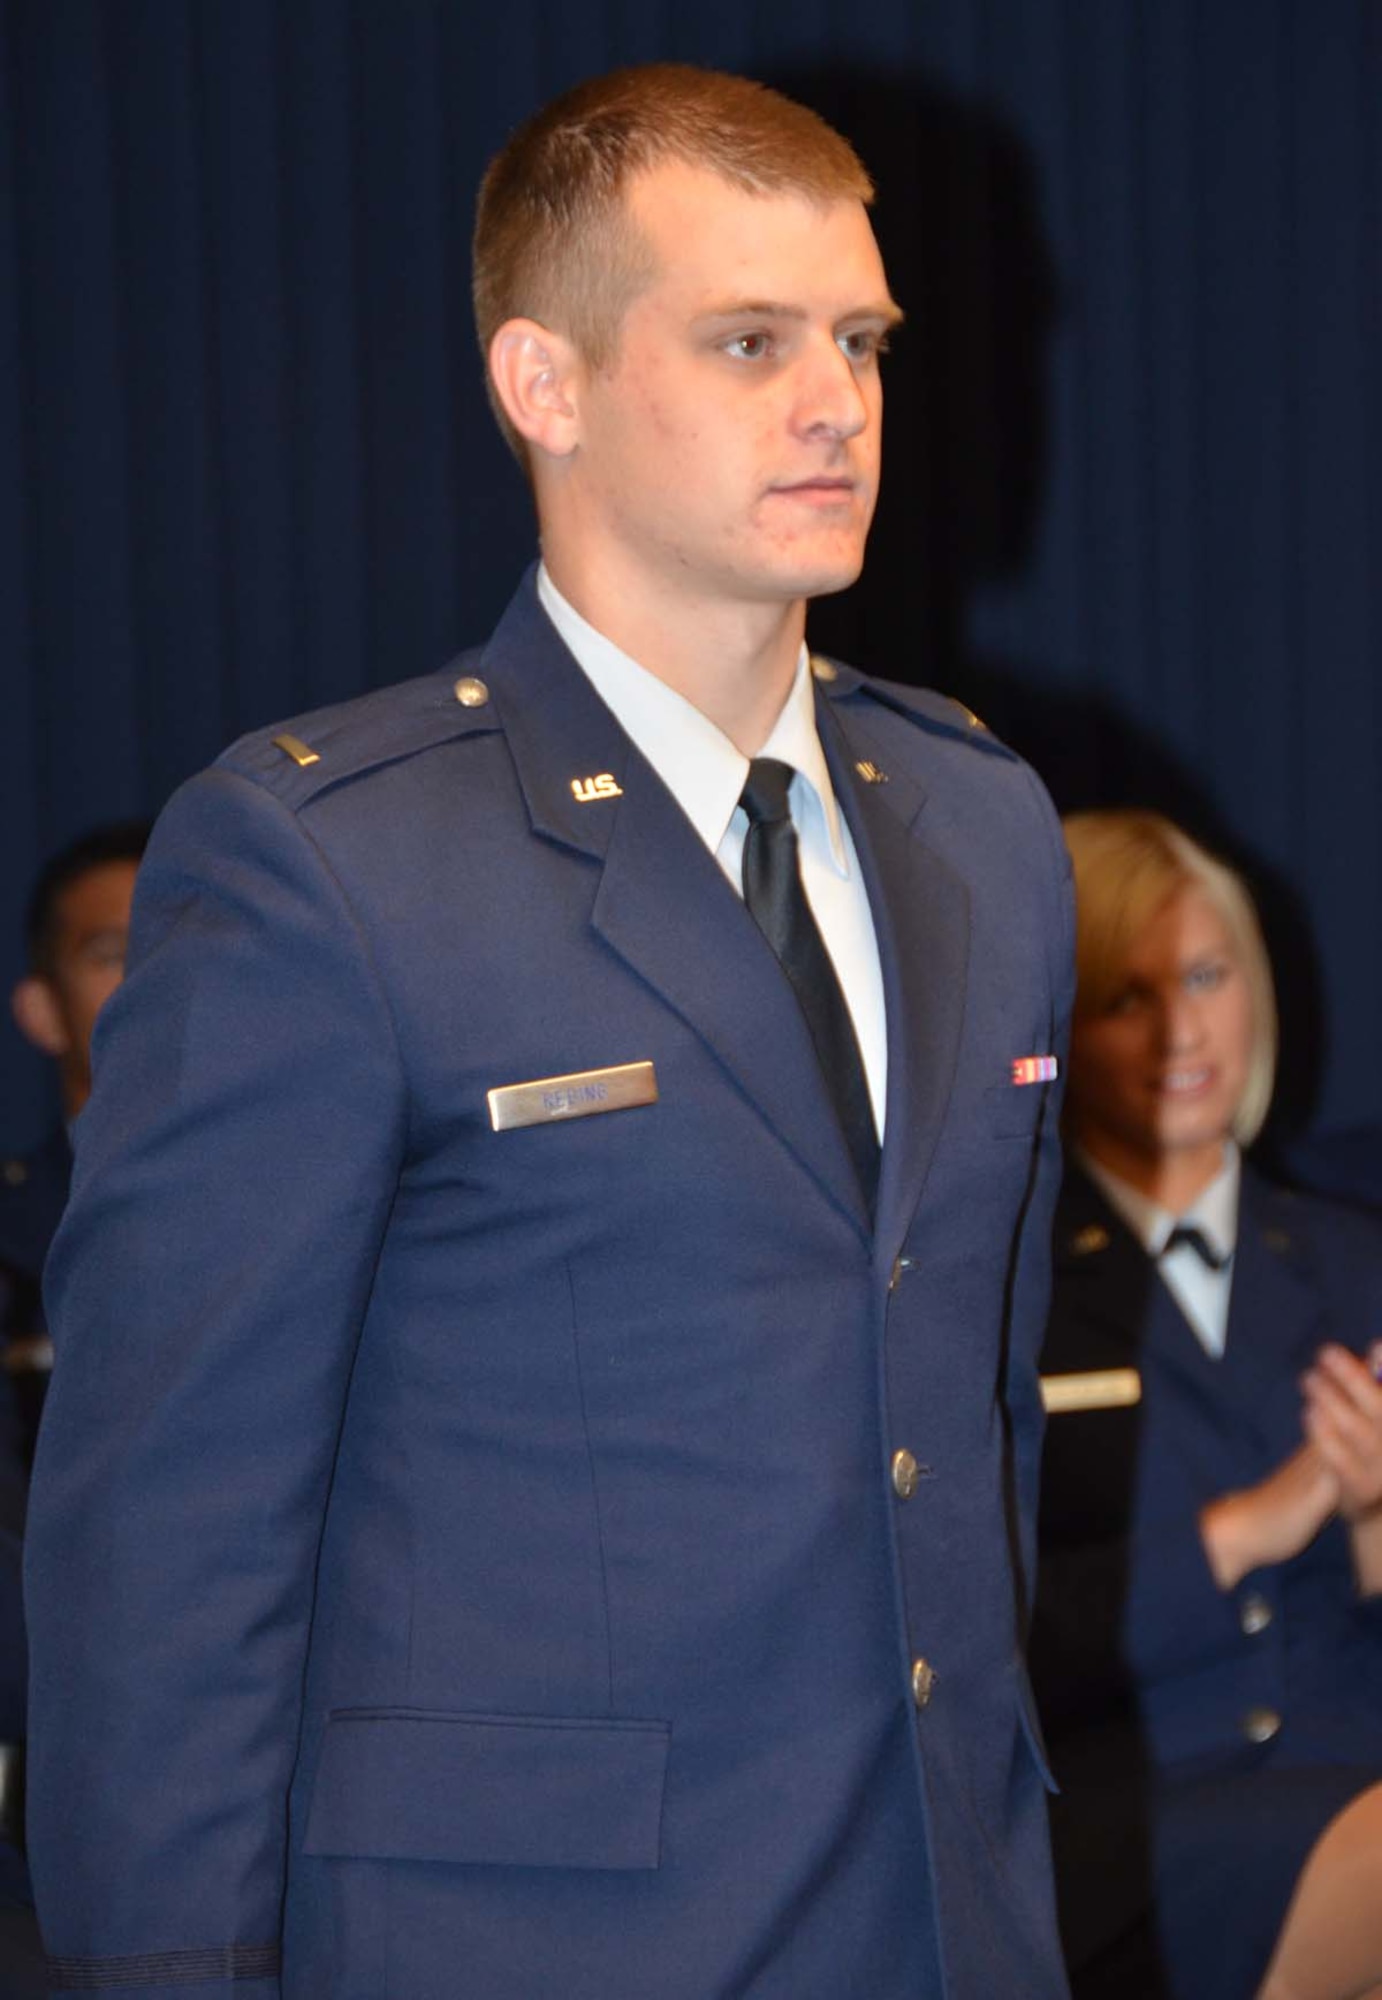 Newly commissioned 2nd Lt. Joshua Reding is formally presented to attendees of the May 11, 2012 University of New Mexico Air Force ROTC commissioning ceremony held at the Air Force Operational Test and Evaluation Center at Kirtland AFB, N.M.